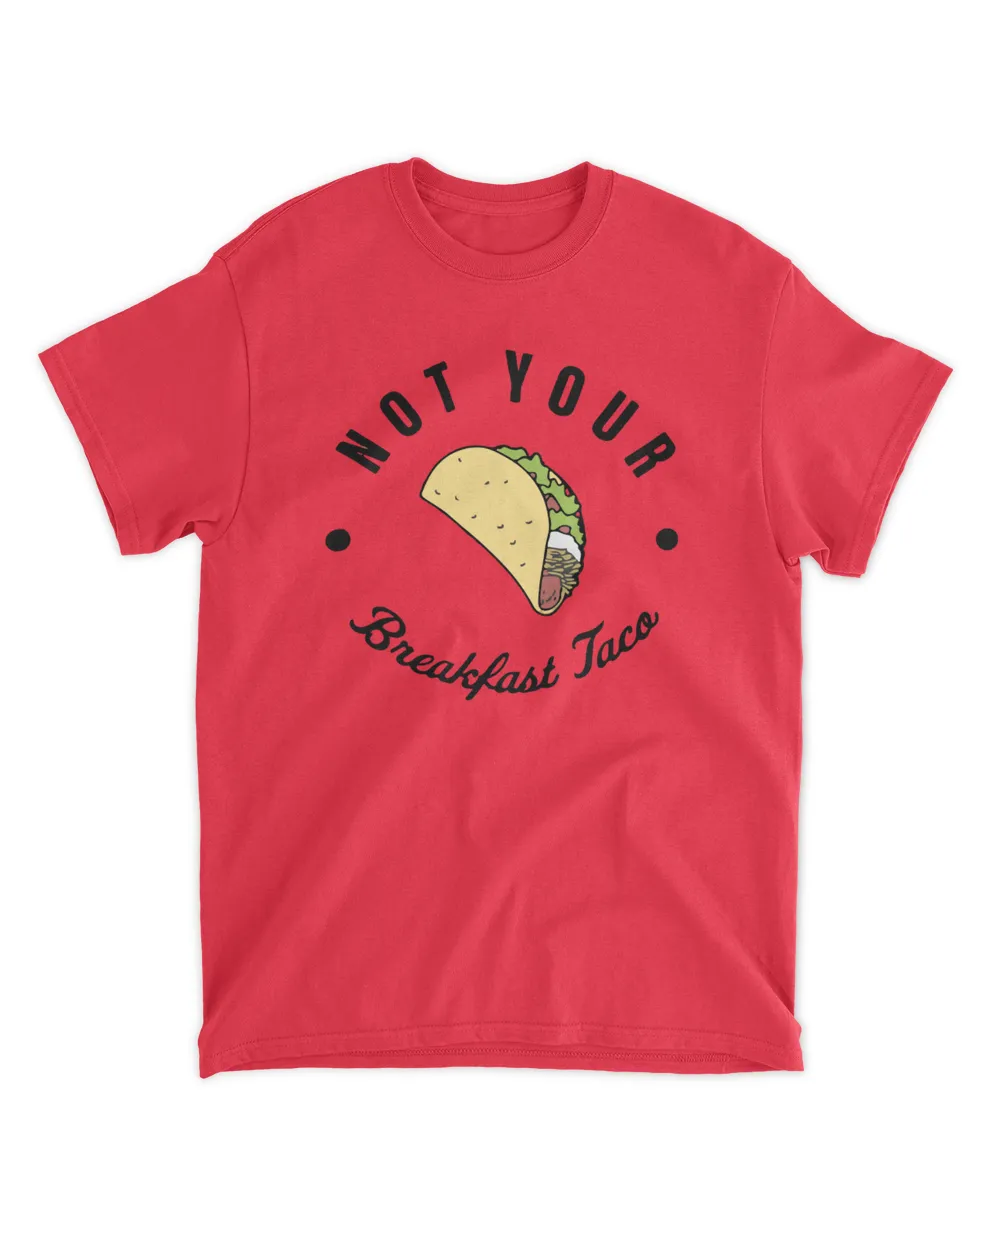 Not Your Breakfast Taco T Shirt